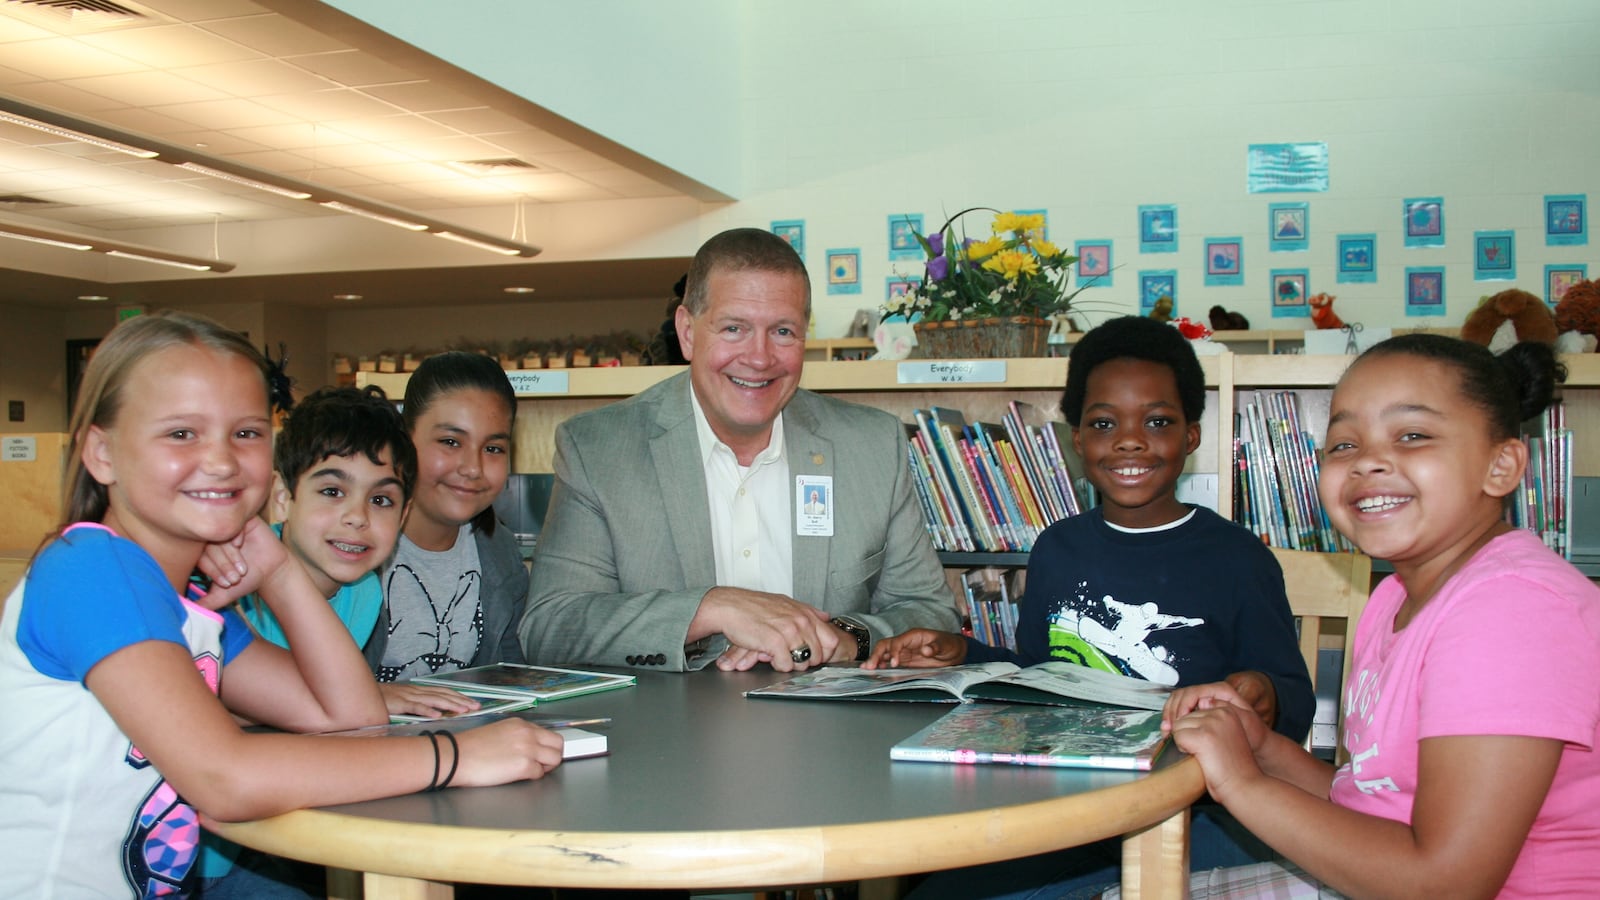 Harry Bull, superintendent of Cherry Creek schools, sits with students. (Photo courtesy of Cherry Creek School District)